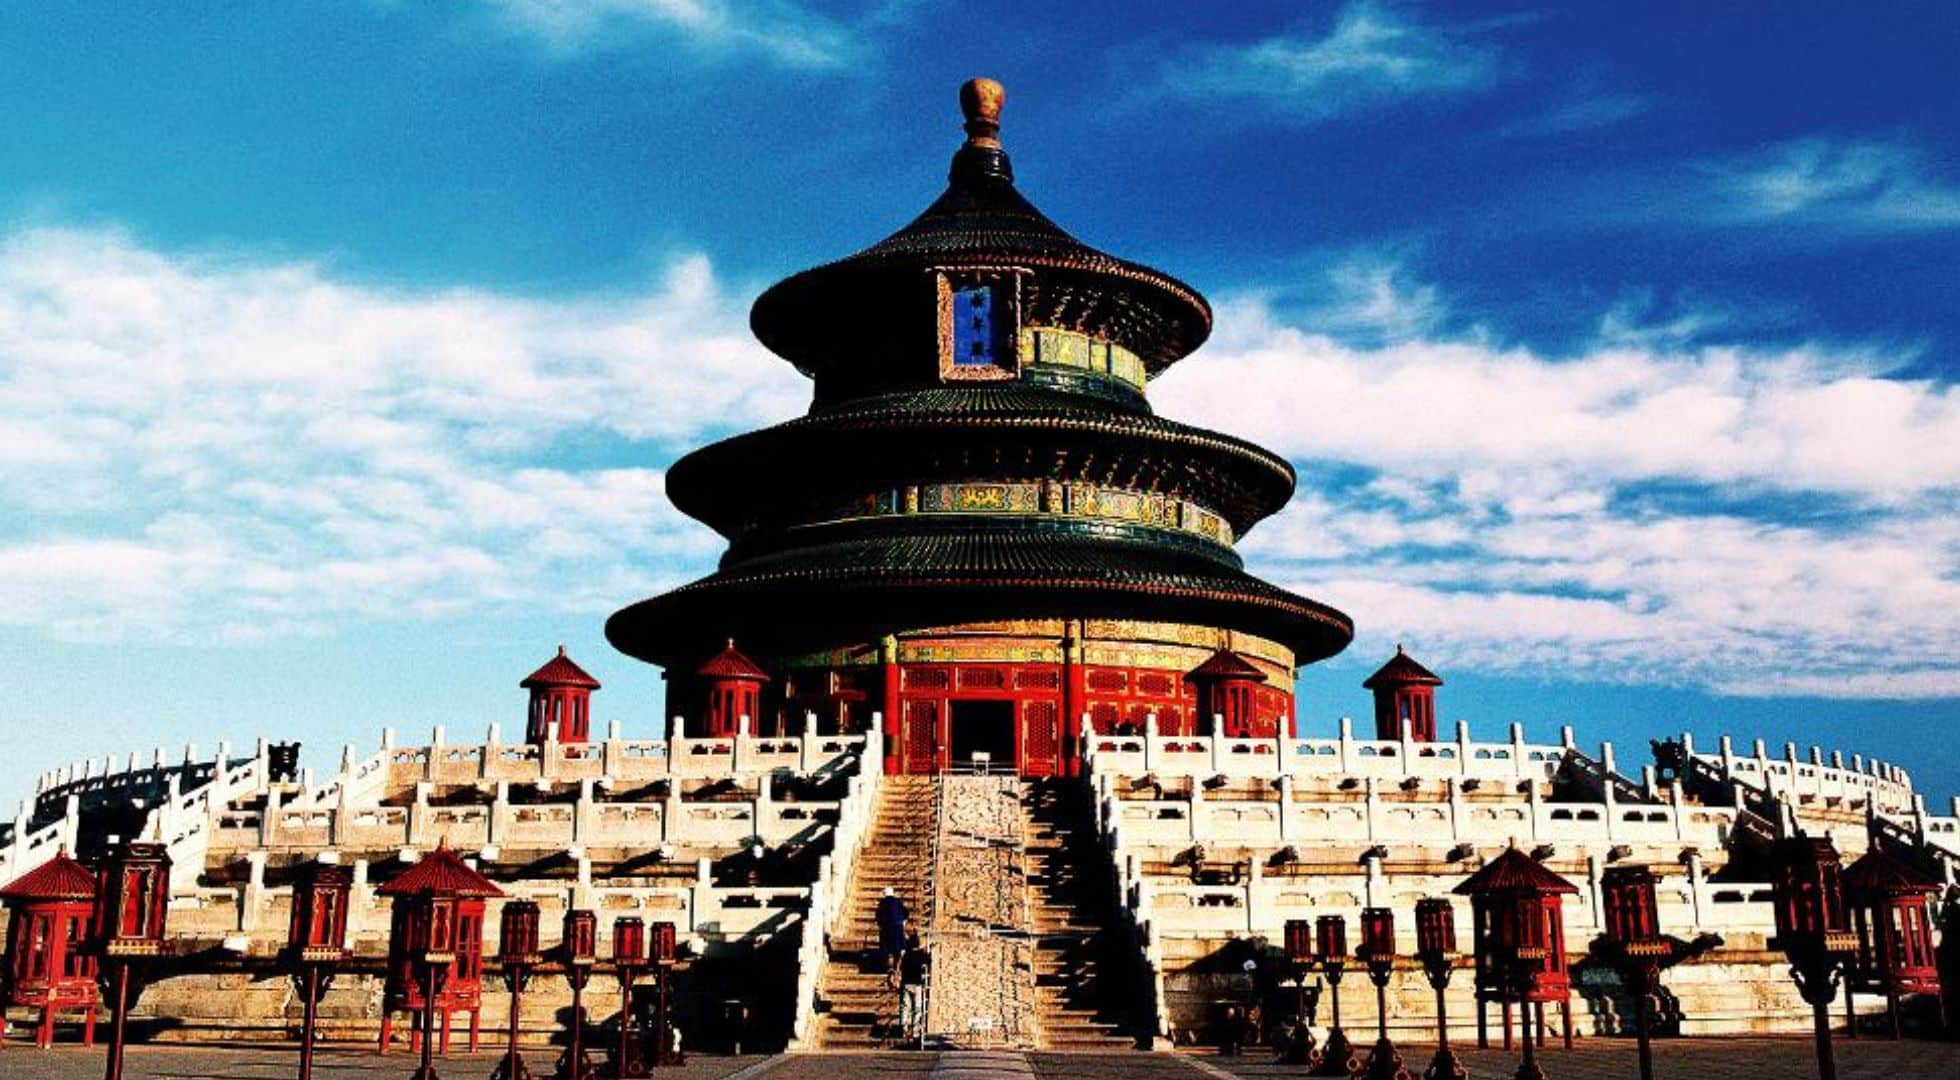 Temple of Heaven in Beijing, China. China still has tight entry rules as per its Zero-Covid policy